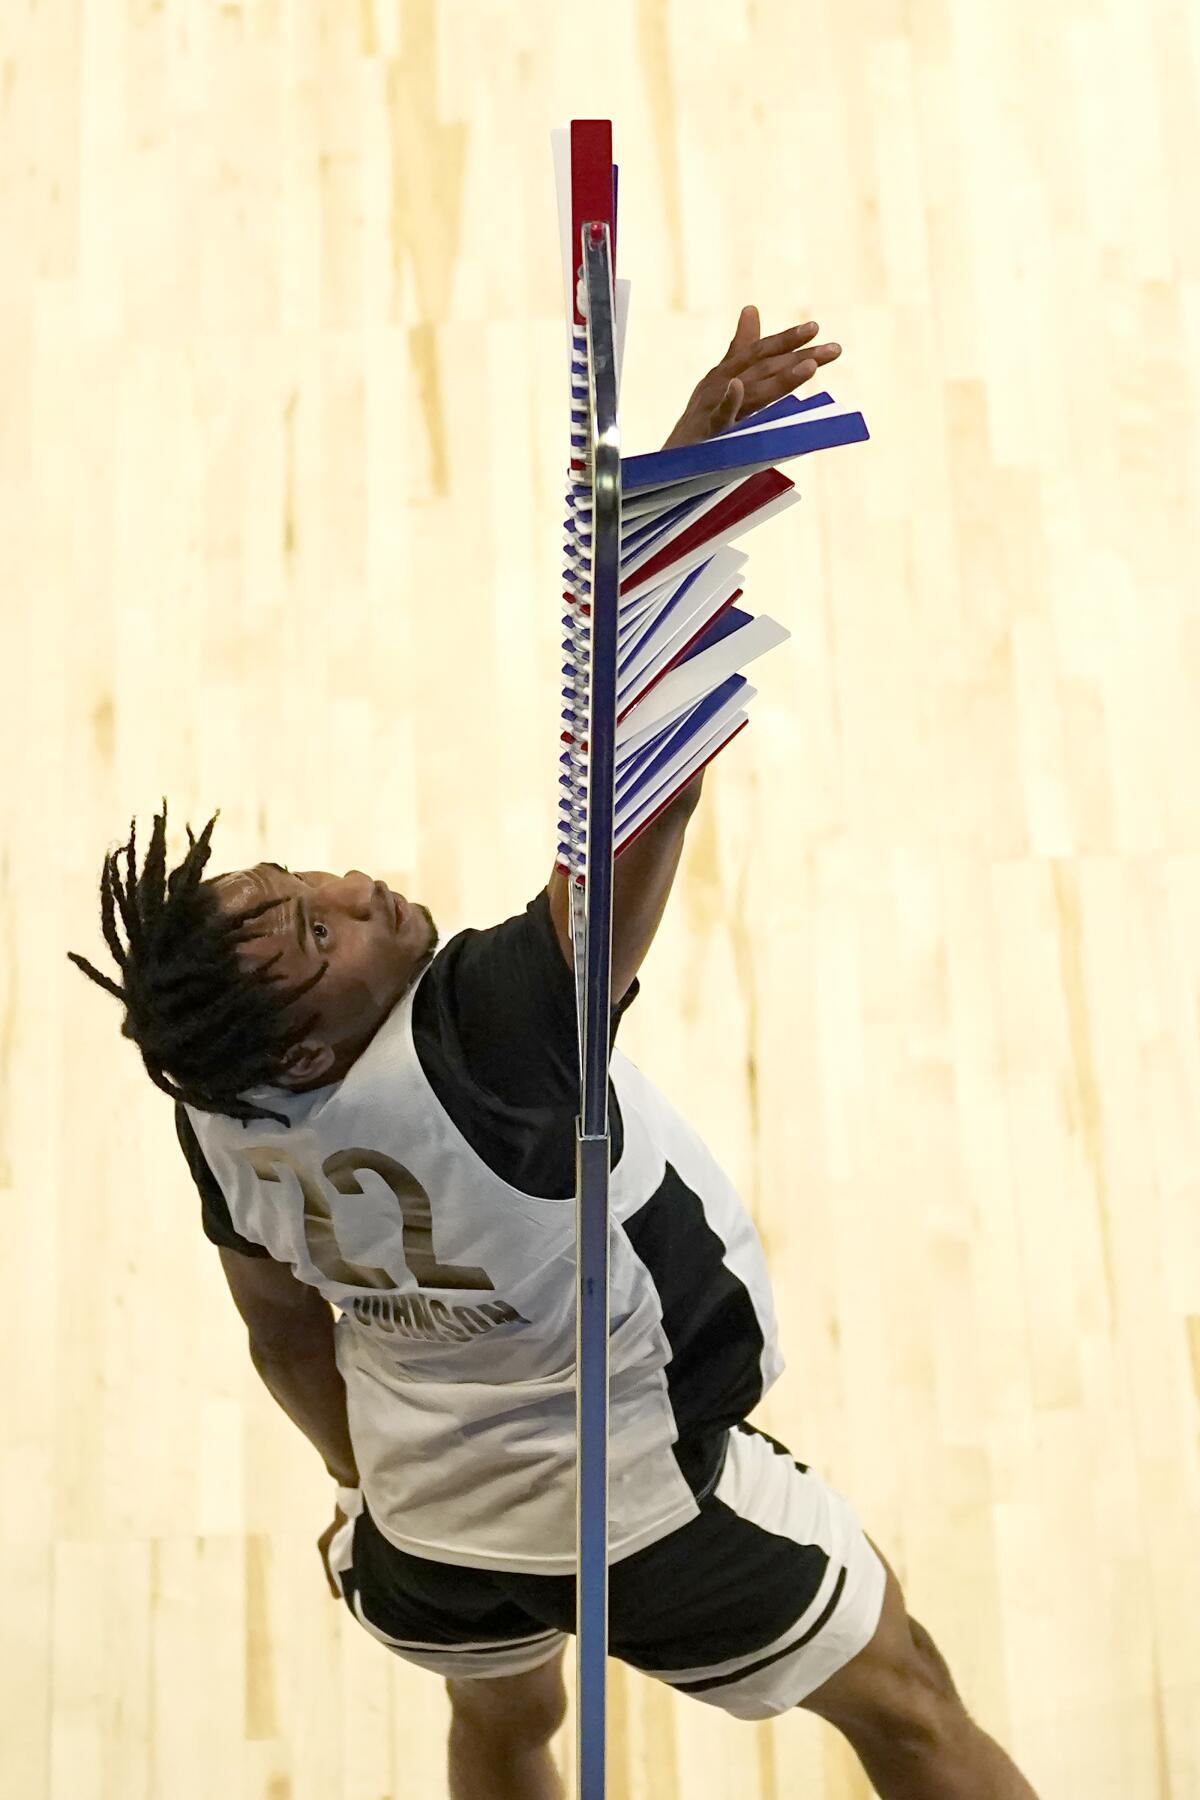 Keon Johnson participates in vertical leap at the NBA draft combine.